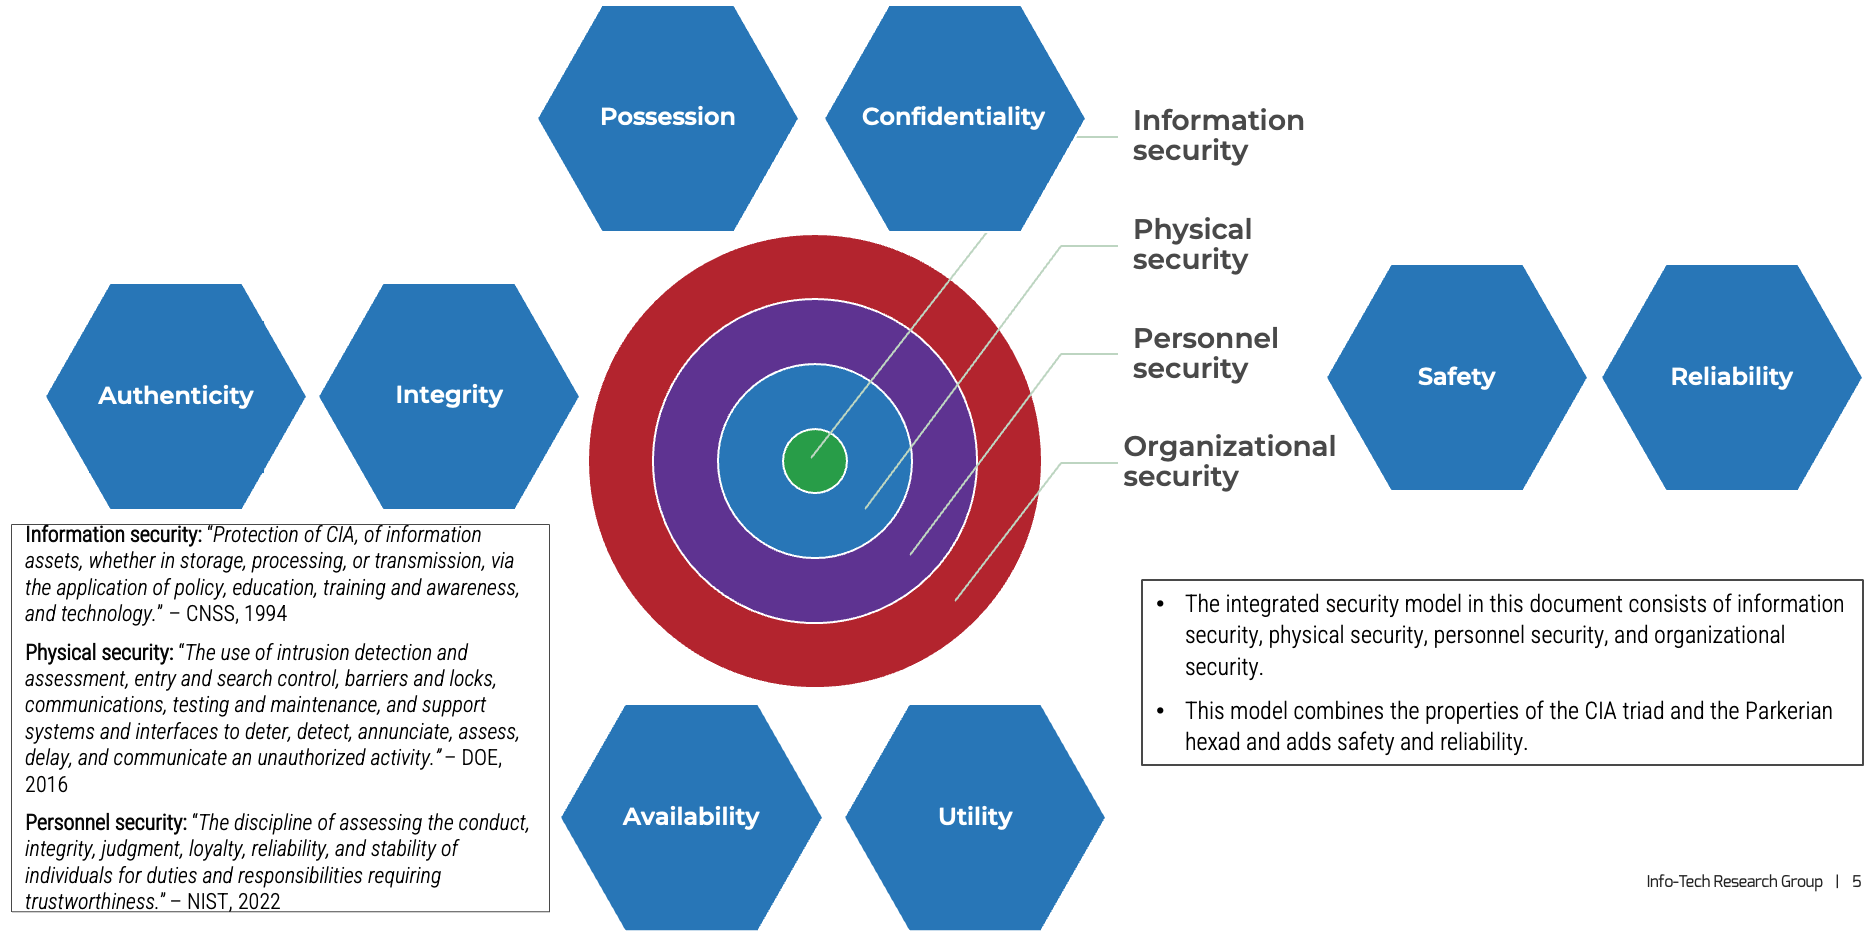 Adopt an integrated security model which consists of information security, physical security, personnel security, and organizational security.